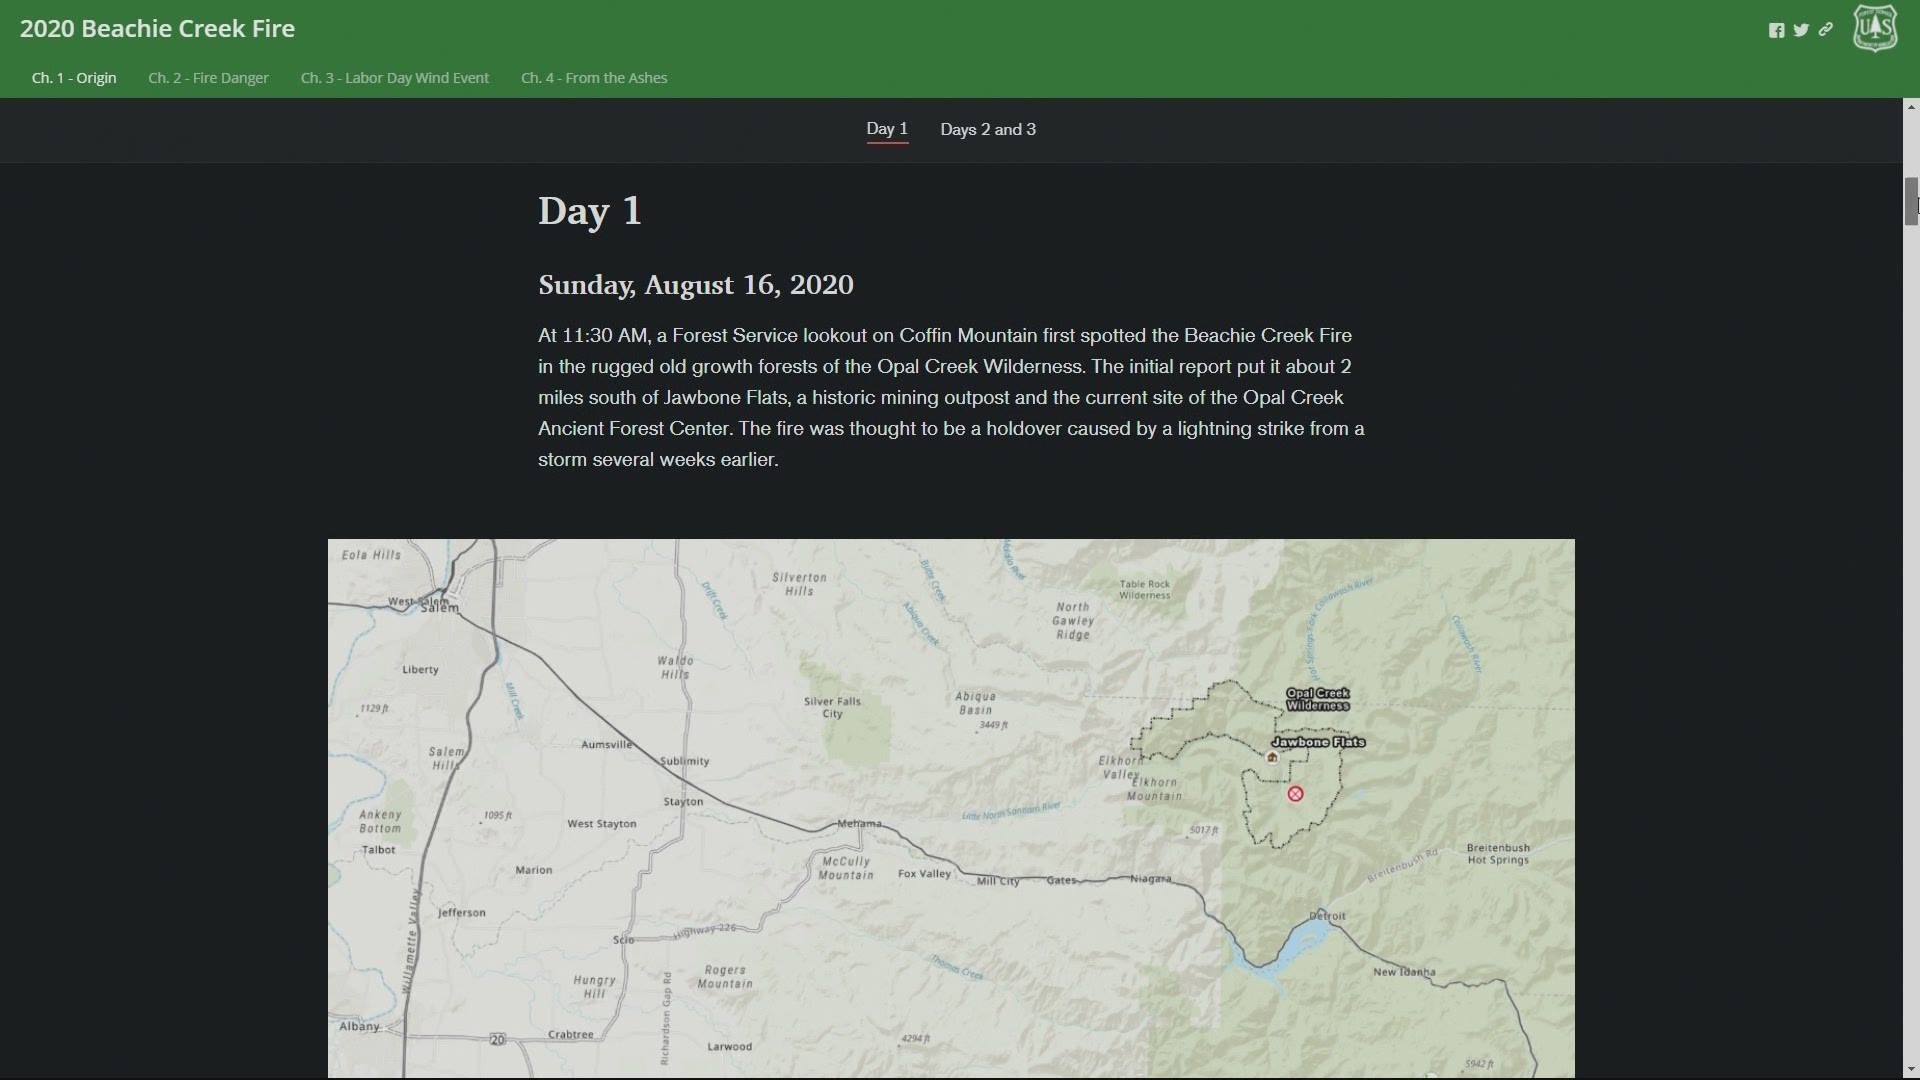 A new website gives a detailed account of what happened during the Beachie Creek Fire last year and why certain decisions were made.